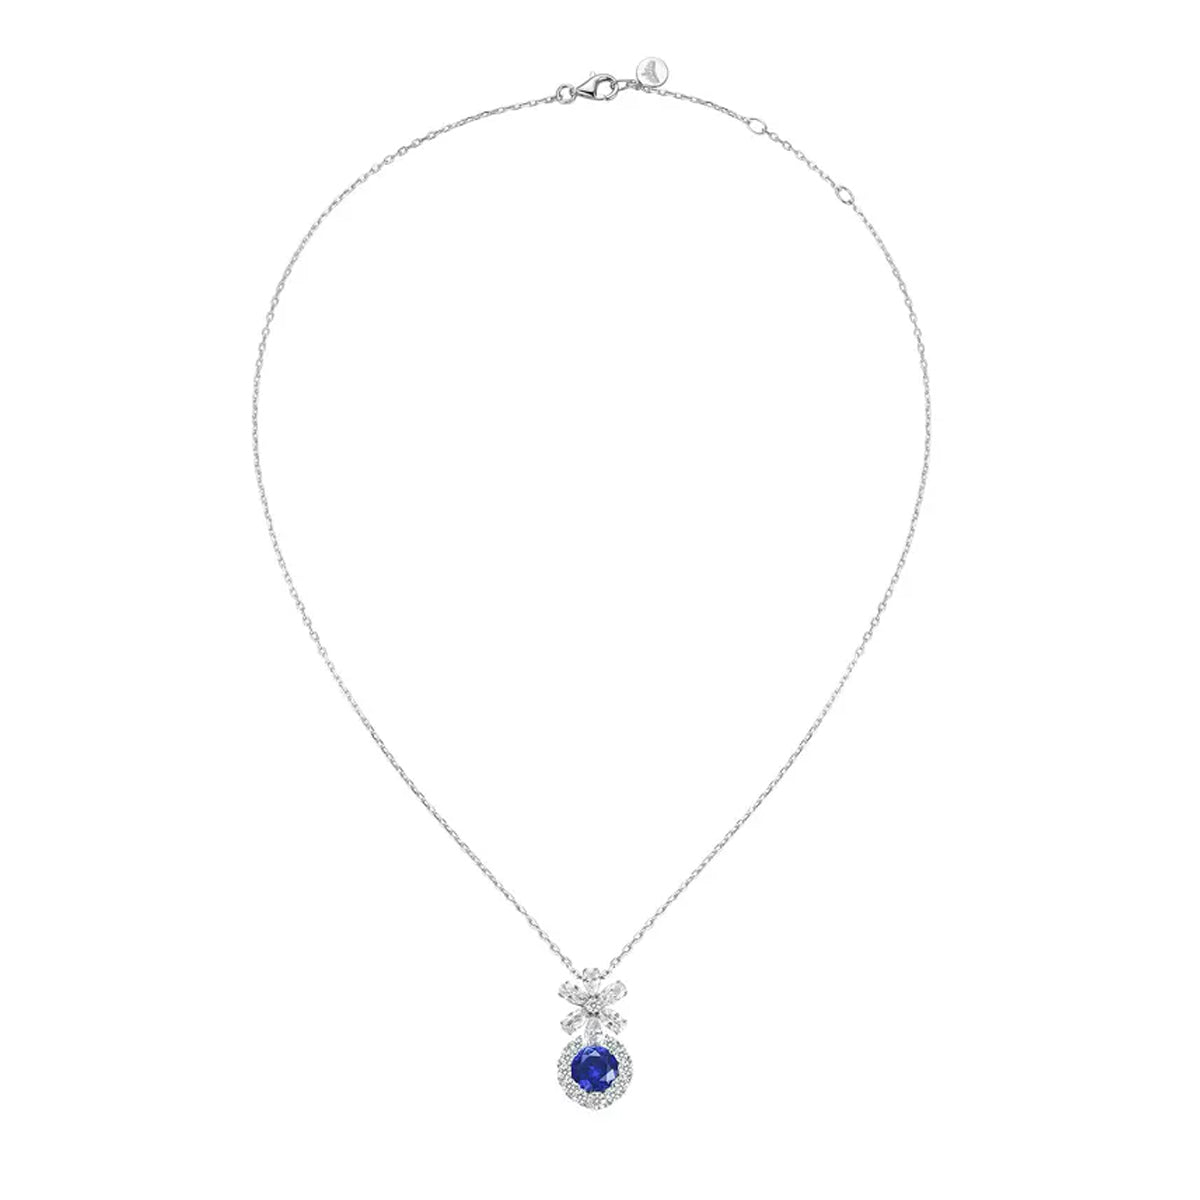 Siliice Jewelry - Sapphire Series -  Royal Blue Necklace Full of Diamonds with Clavicle Chain For Women